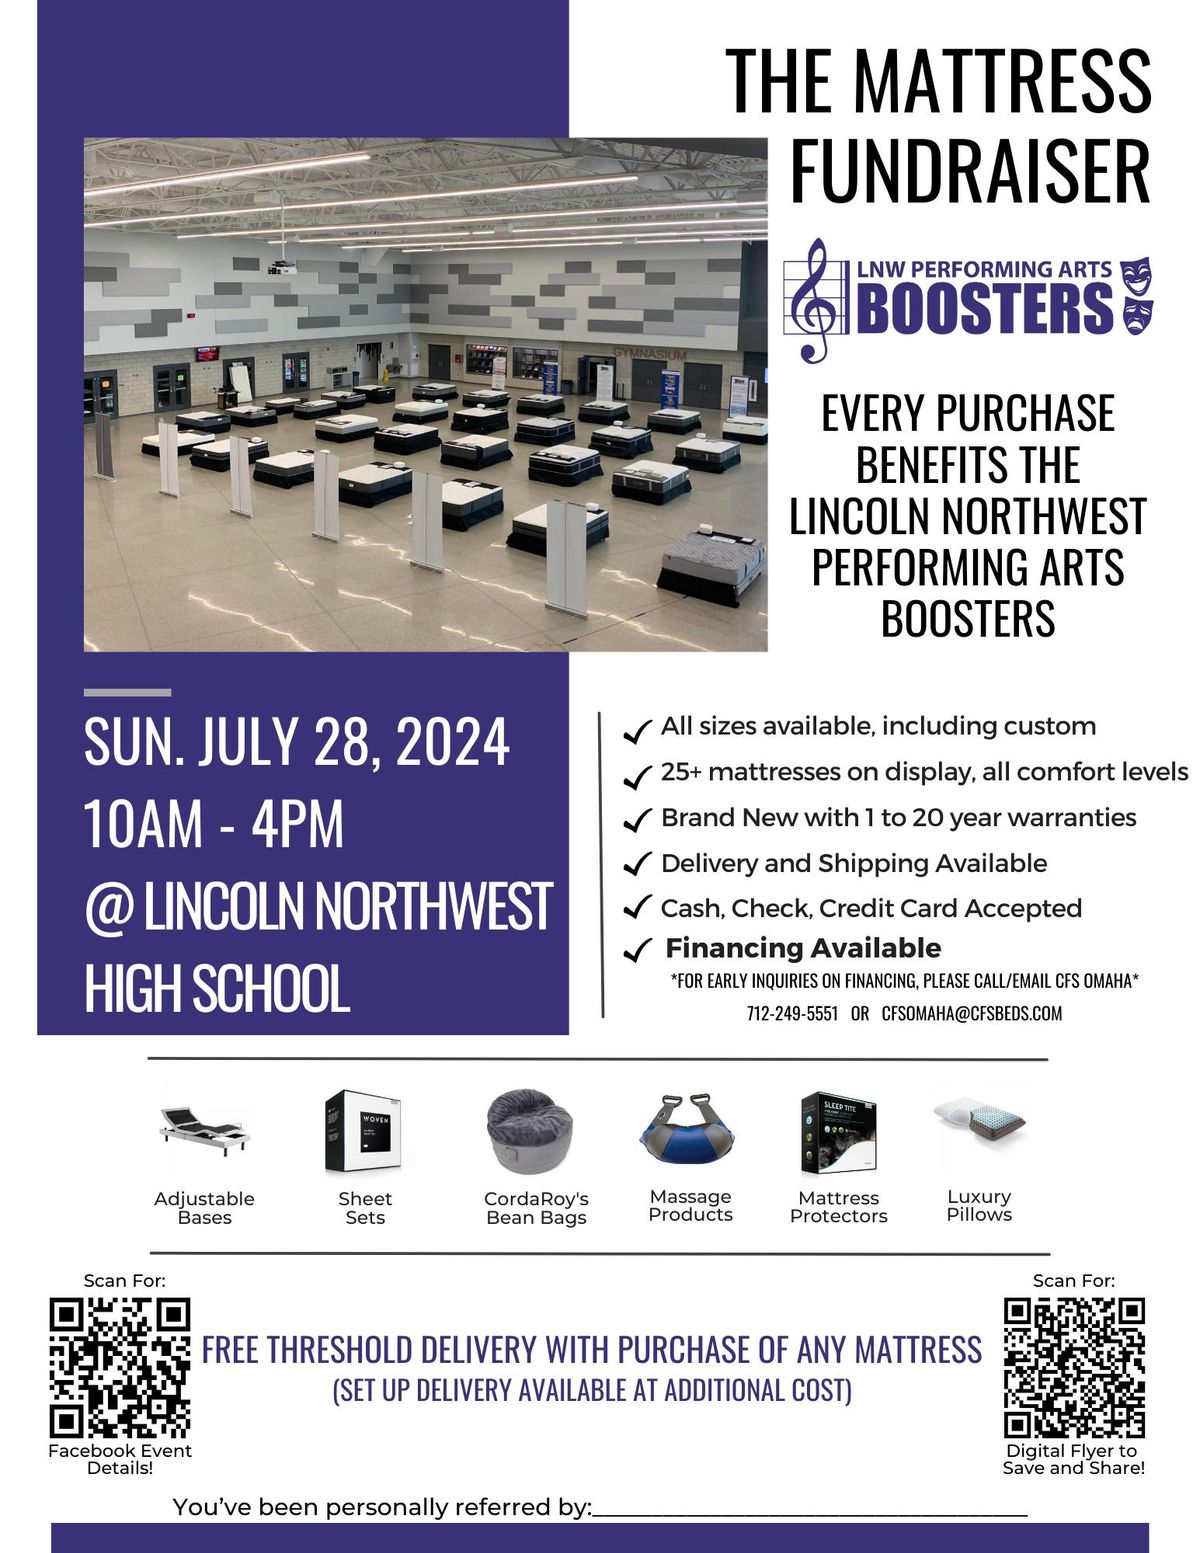 Mattress Sale - Sponsored by LNW Performing Arts Boosters